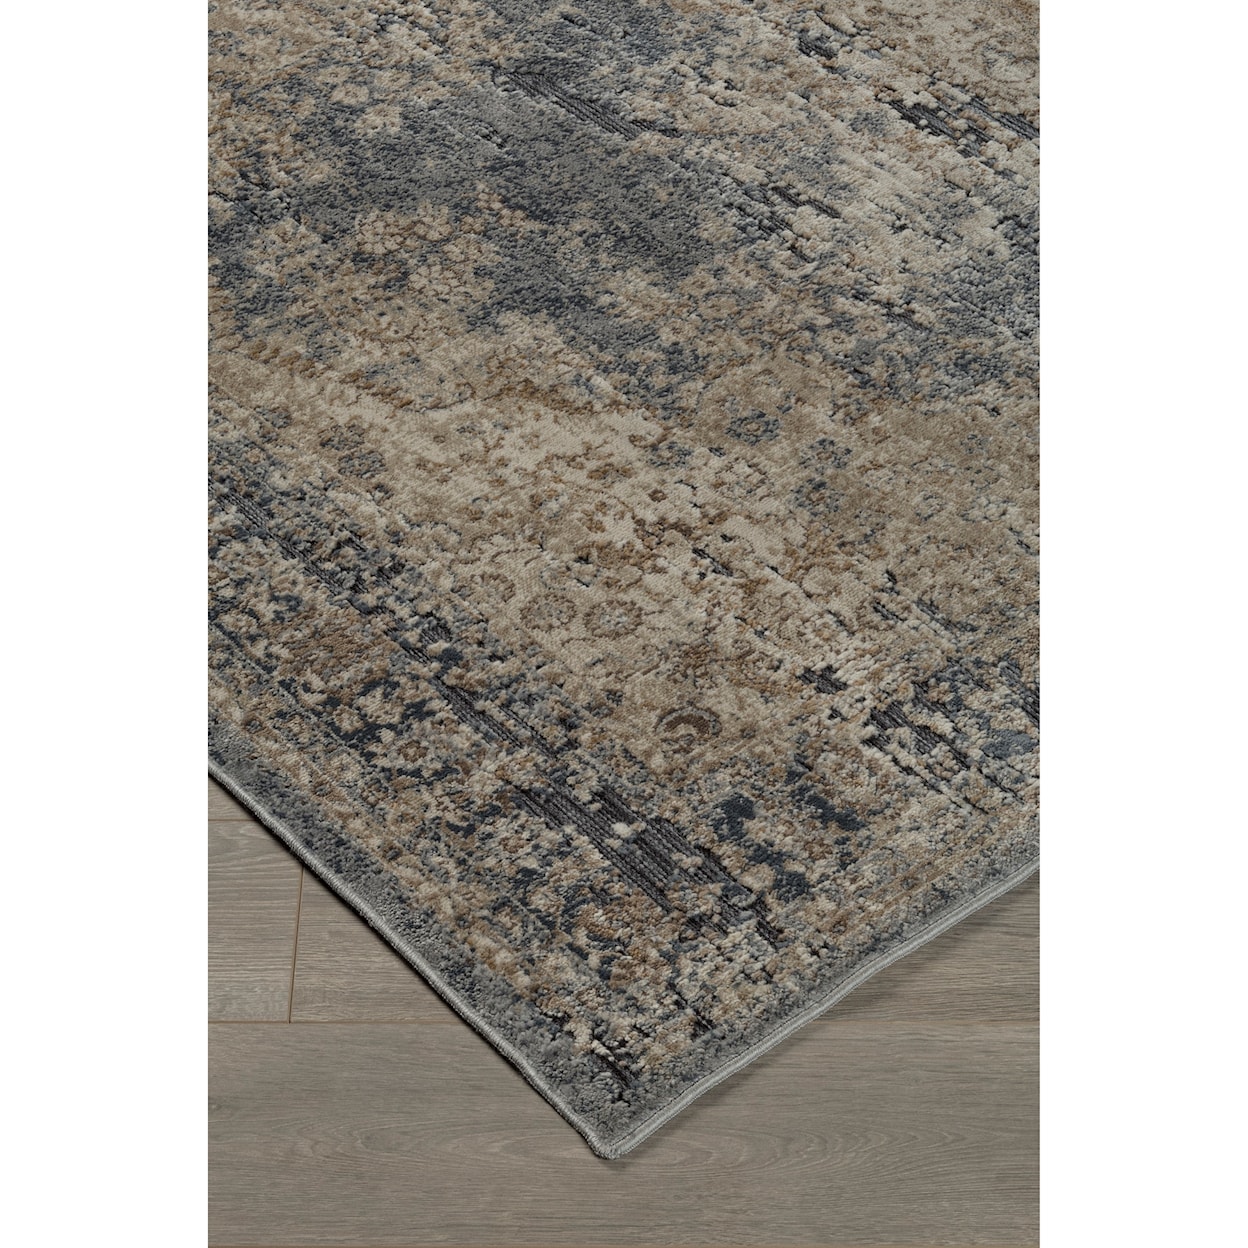 Benchcraft Traditional Classics Area Rugs South Blue/Tan Large Rug